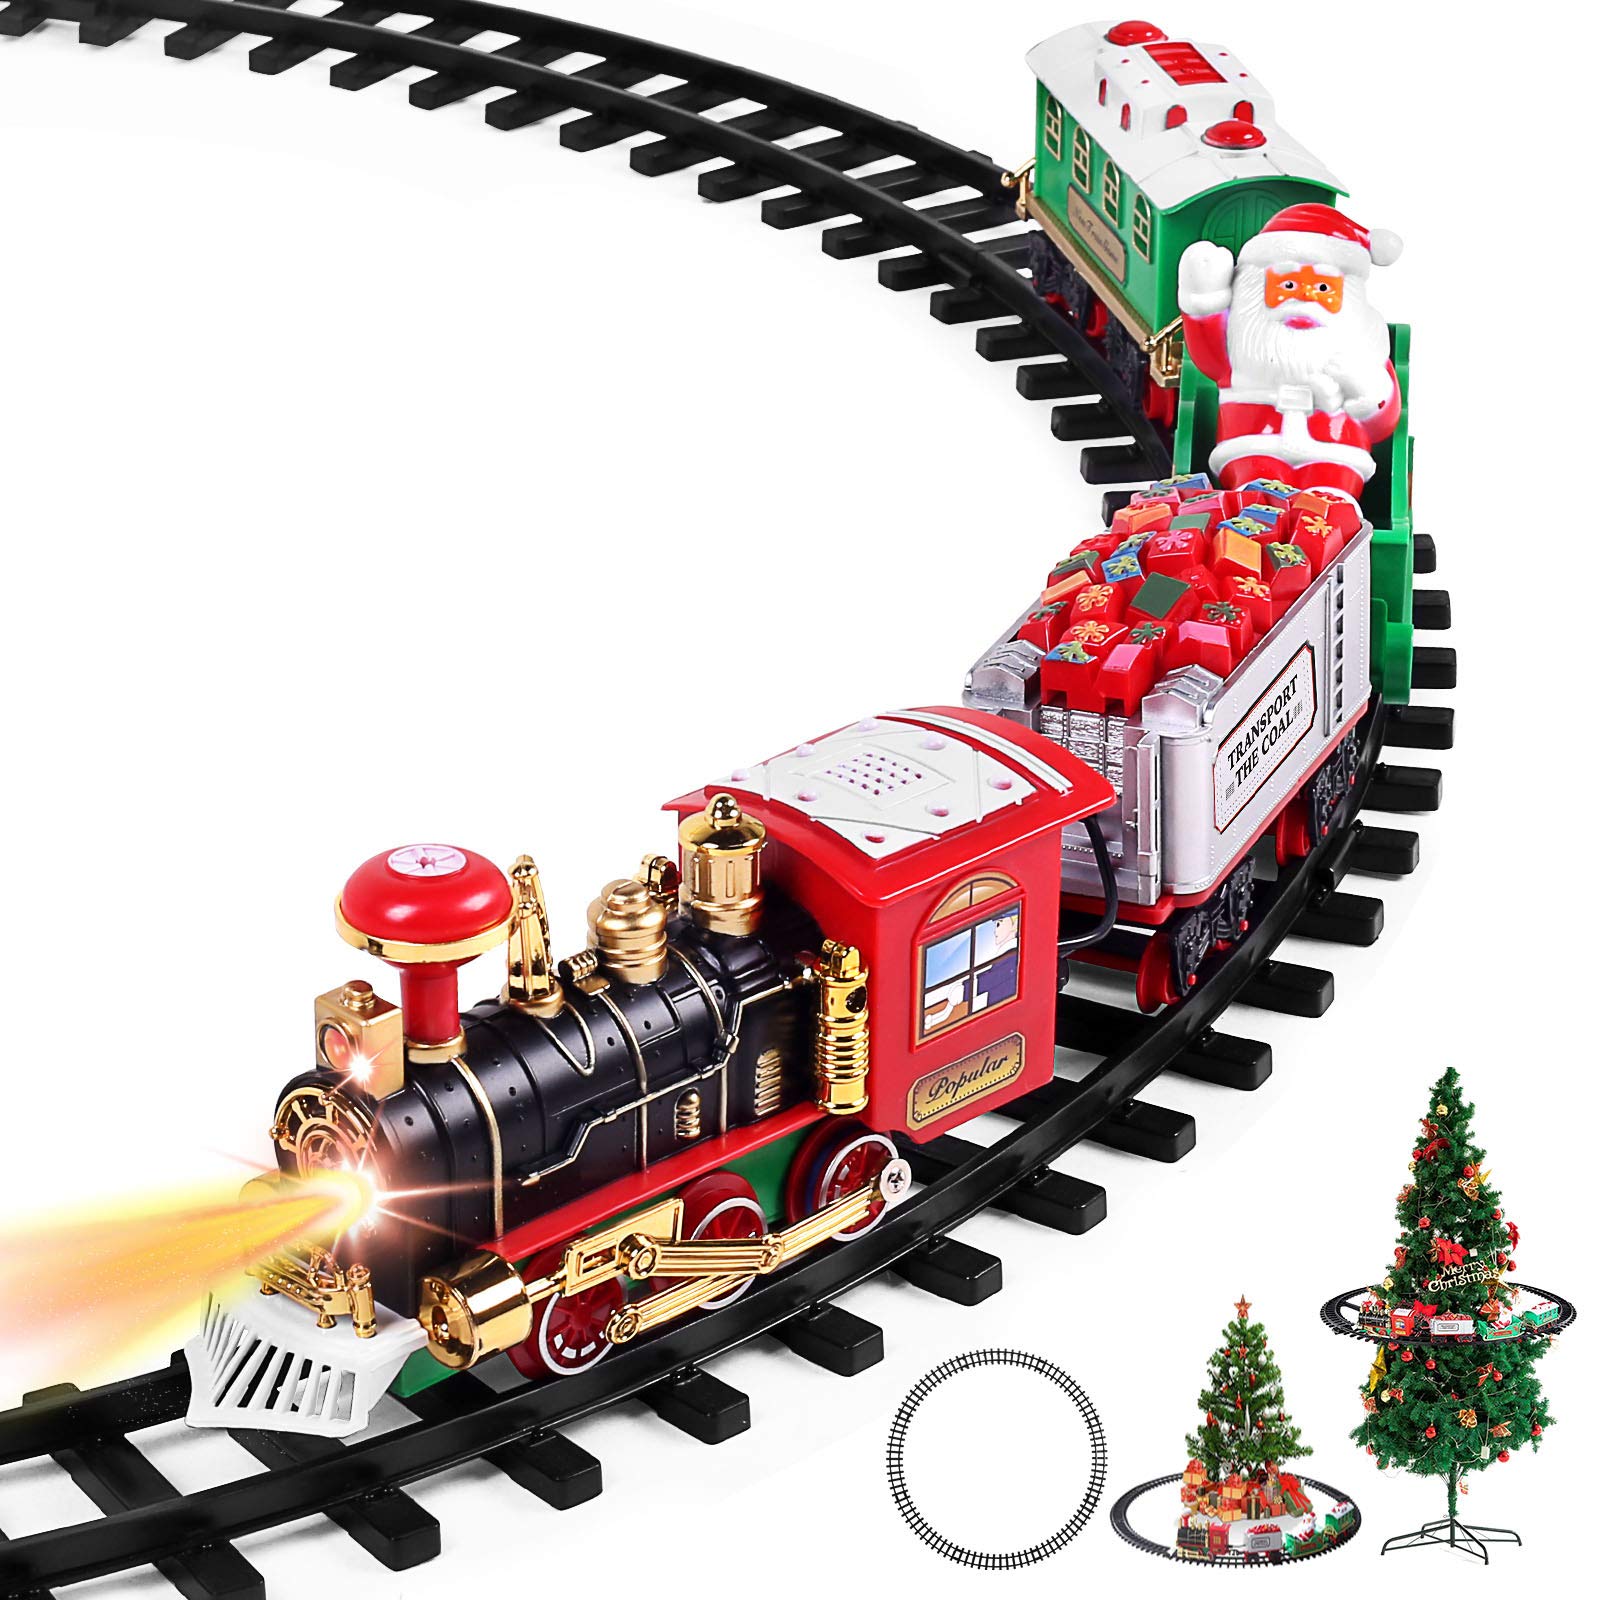 Christmas Train Set - Toy Train Set with Lights and Sounds, Round Railway Tracks for Under/Around The Christmas Tree, Best Gifts for 3 4 5 6 7 8+ Years Kids Boys Girls